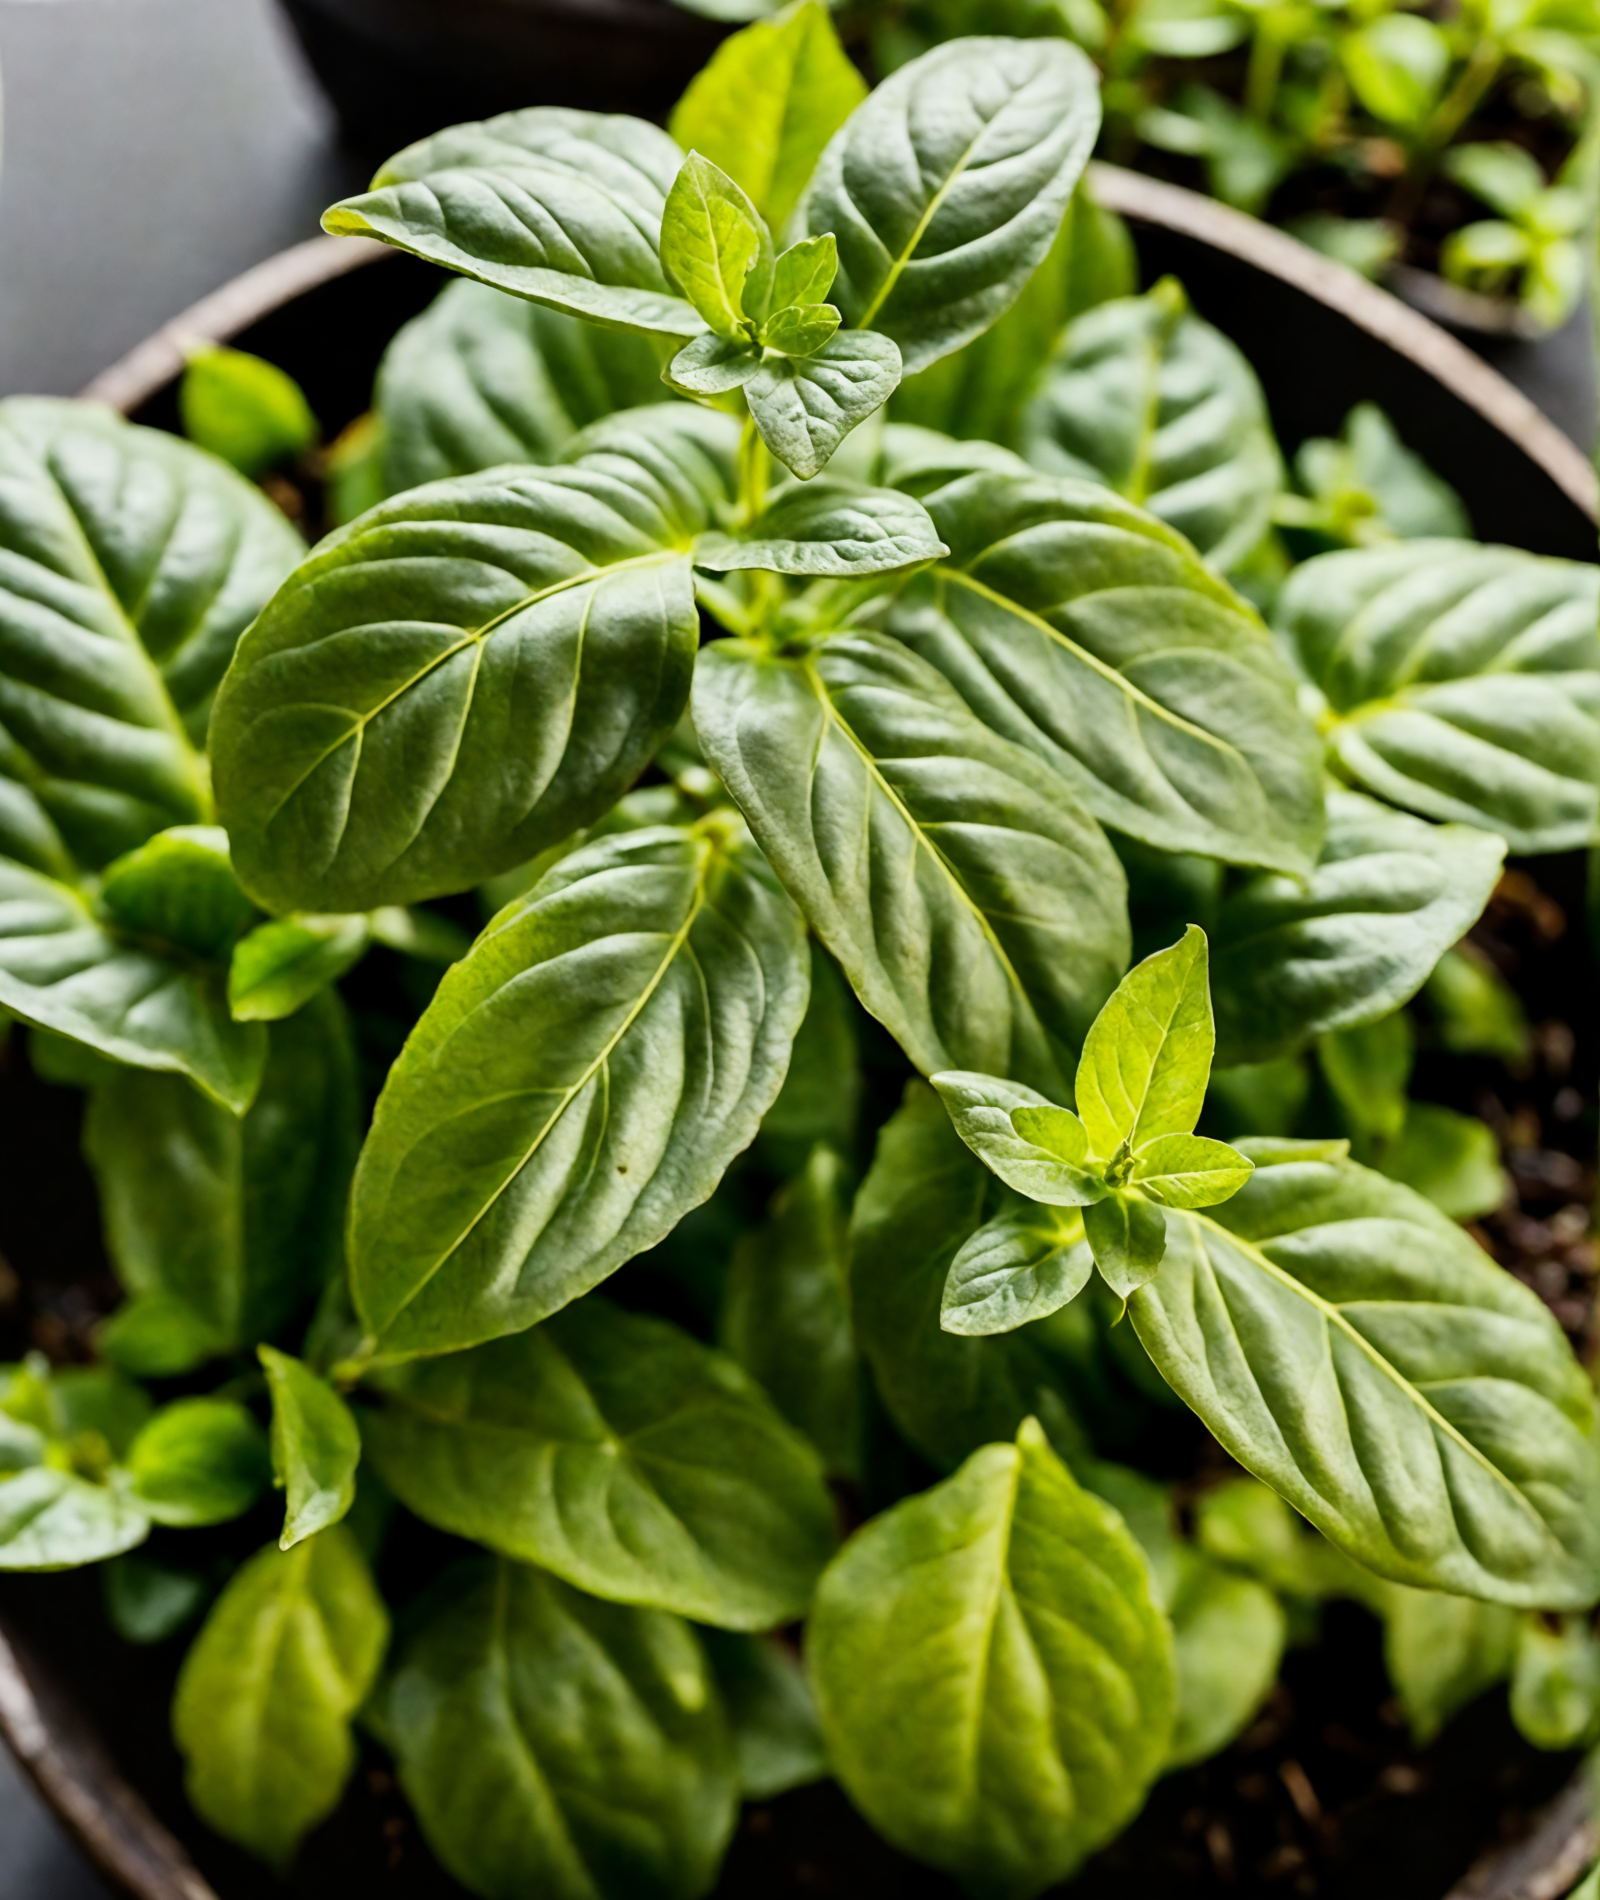 Potted Ocimum basilicum (basil) with vibrant green leaves, in a bowl, against a dark background, clear indoor lighting.